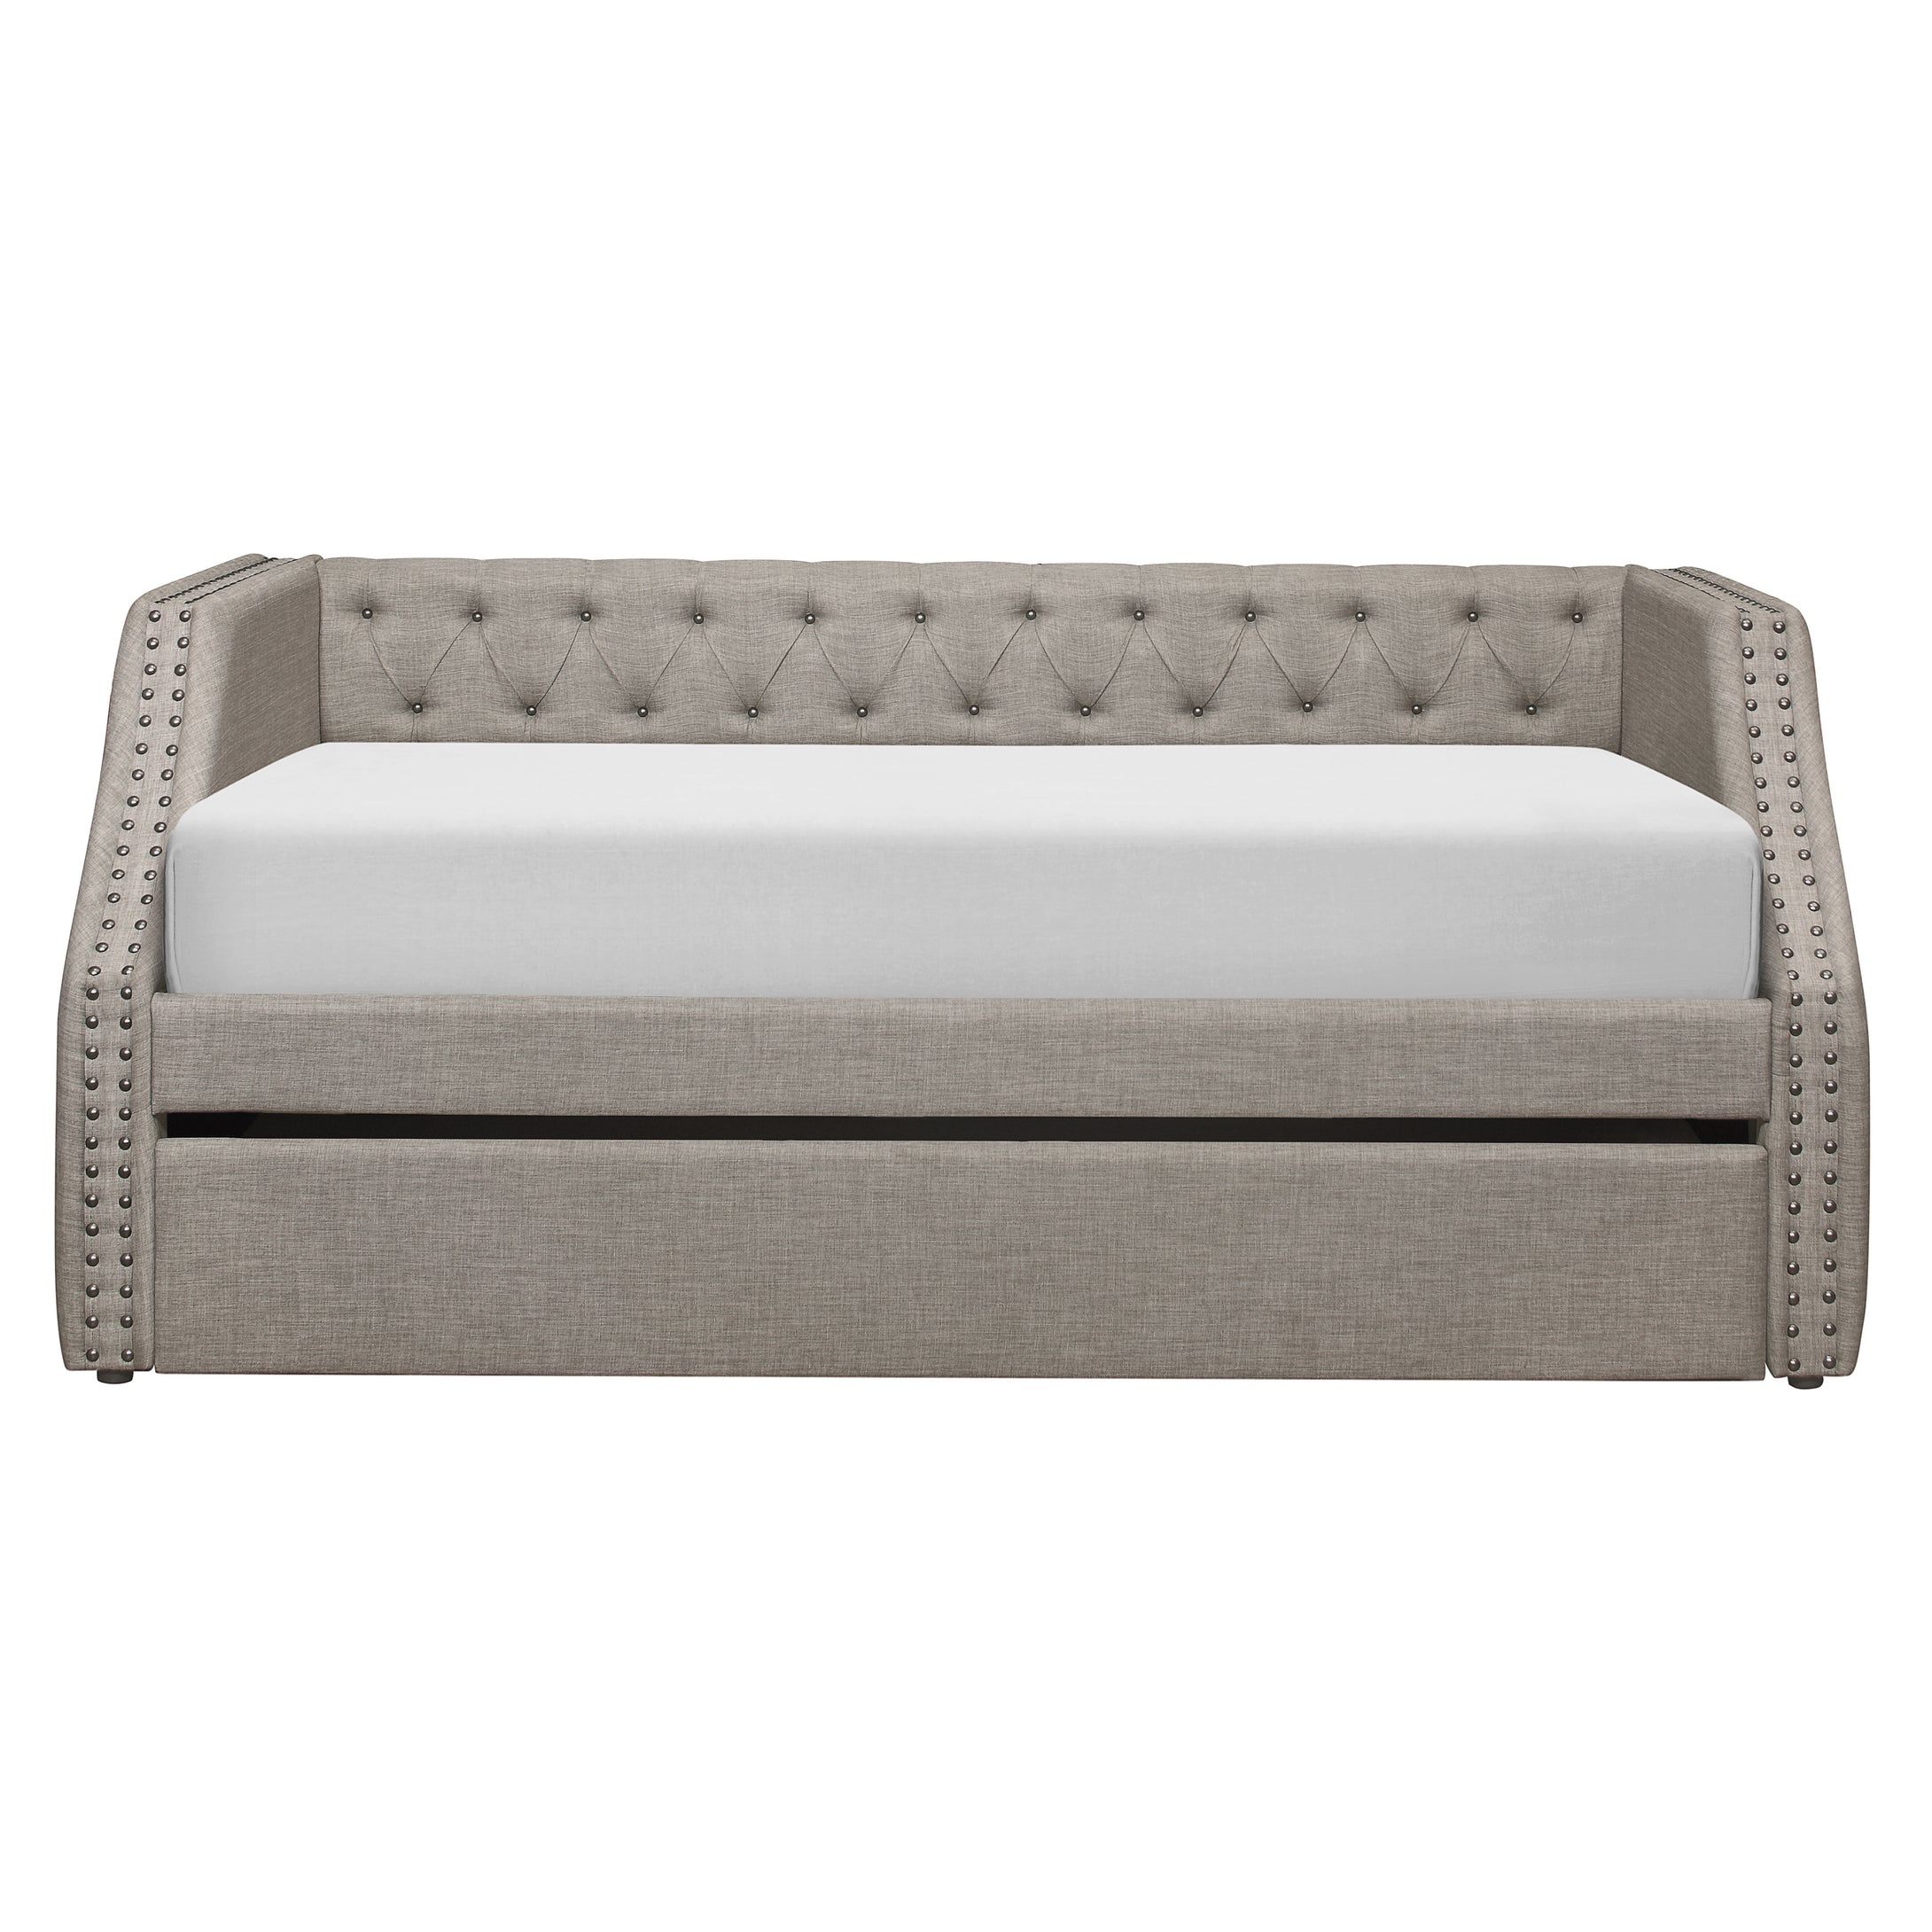 4985BR* Daybed with Trundle